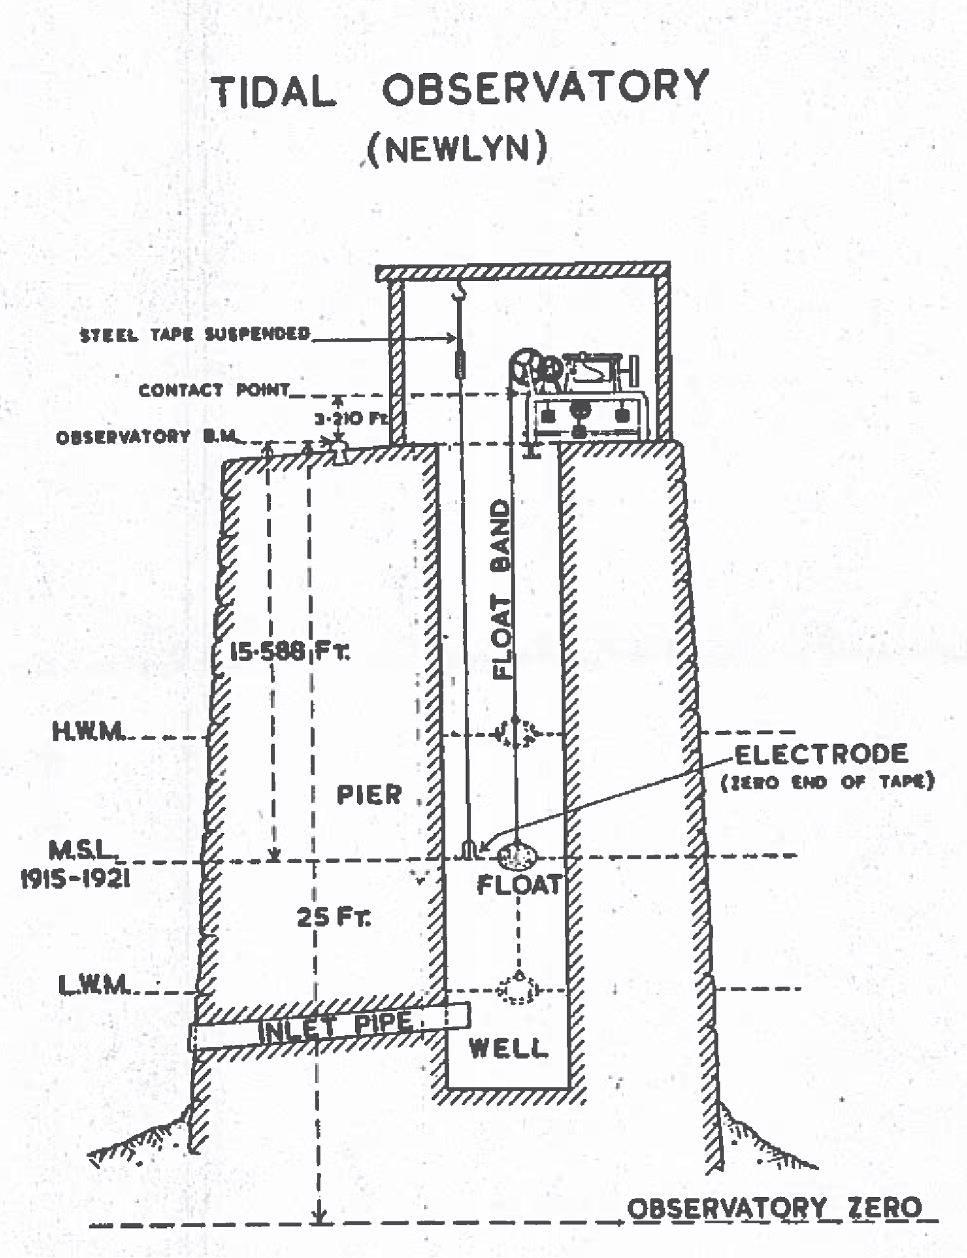 Diagram of the Tidal Observatory